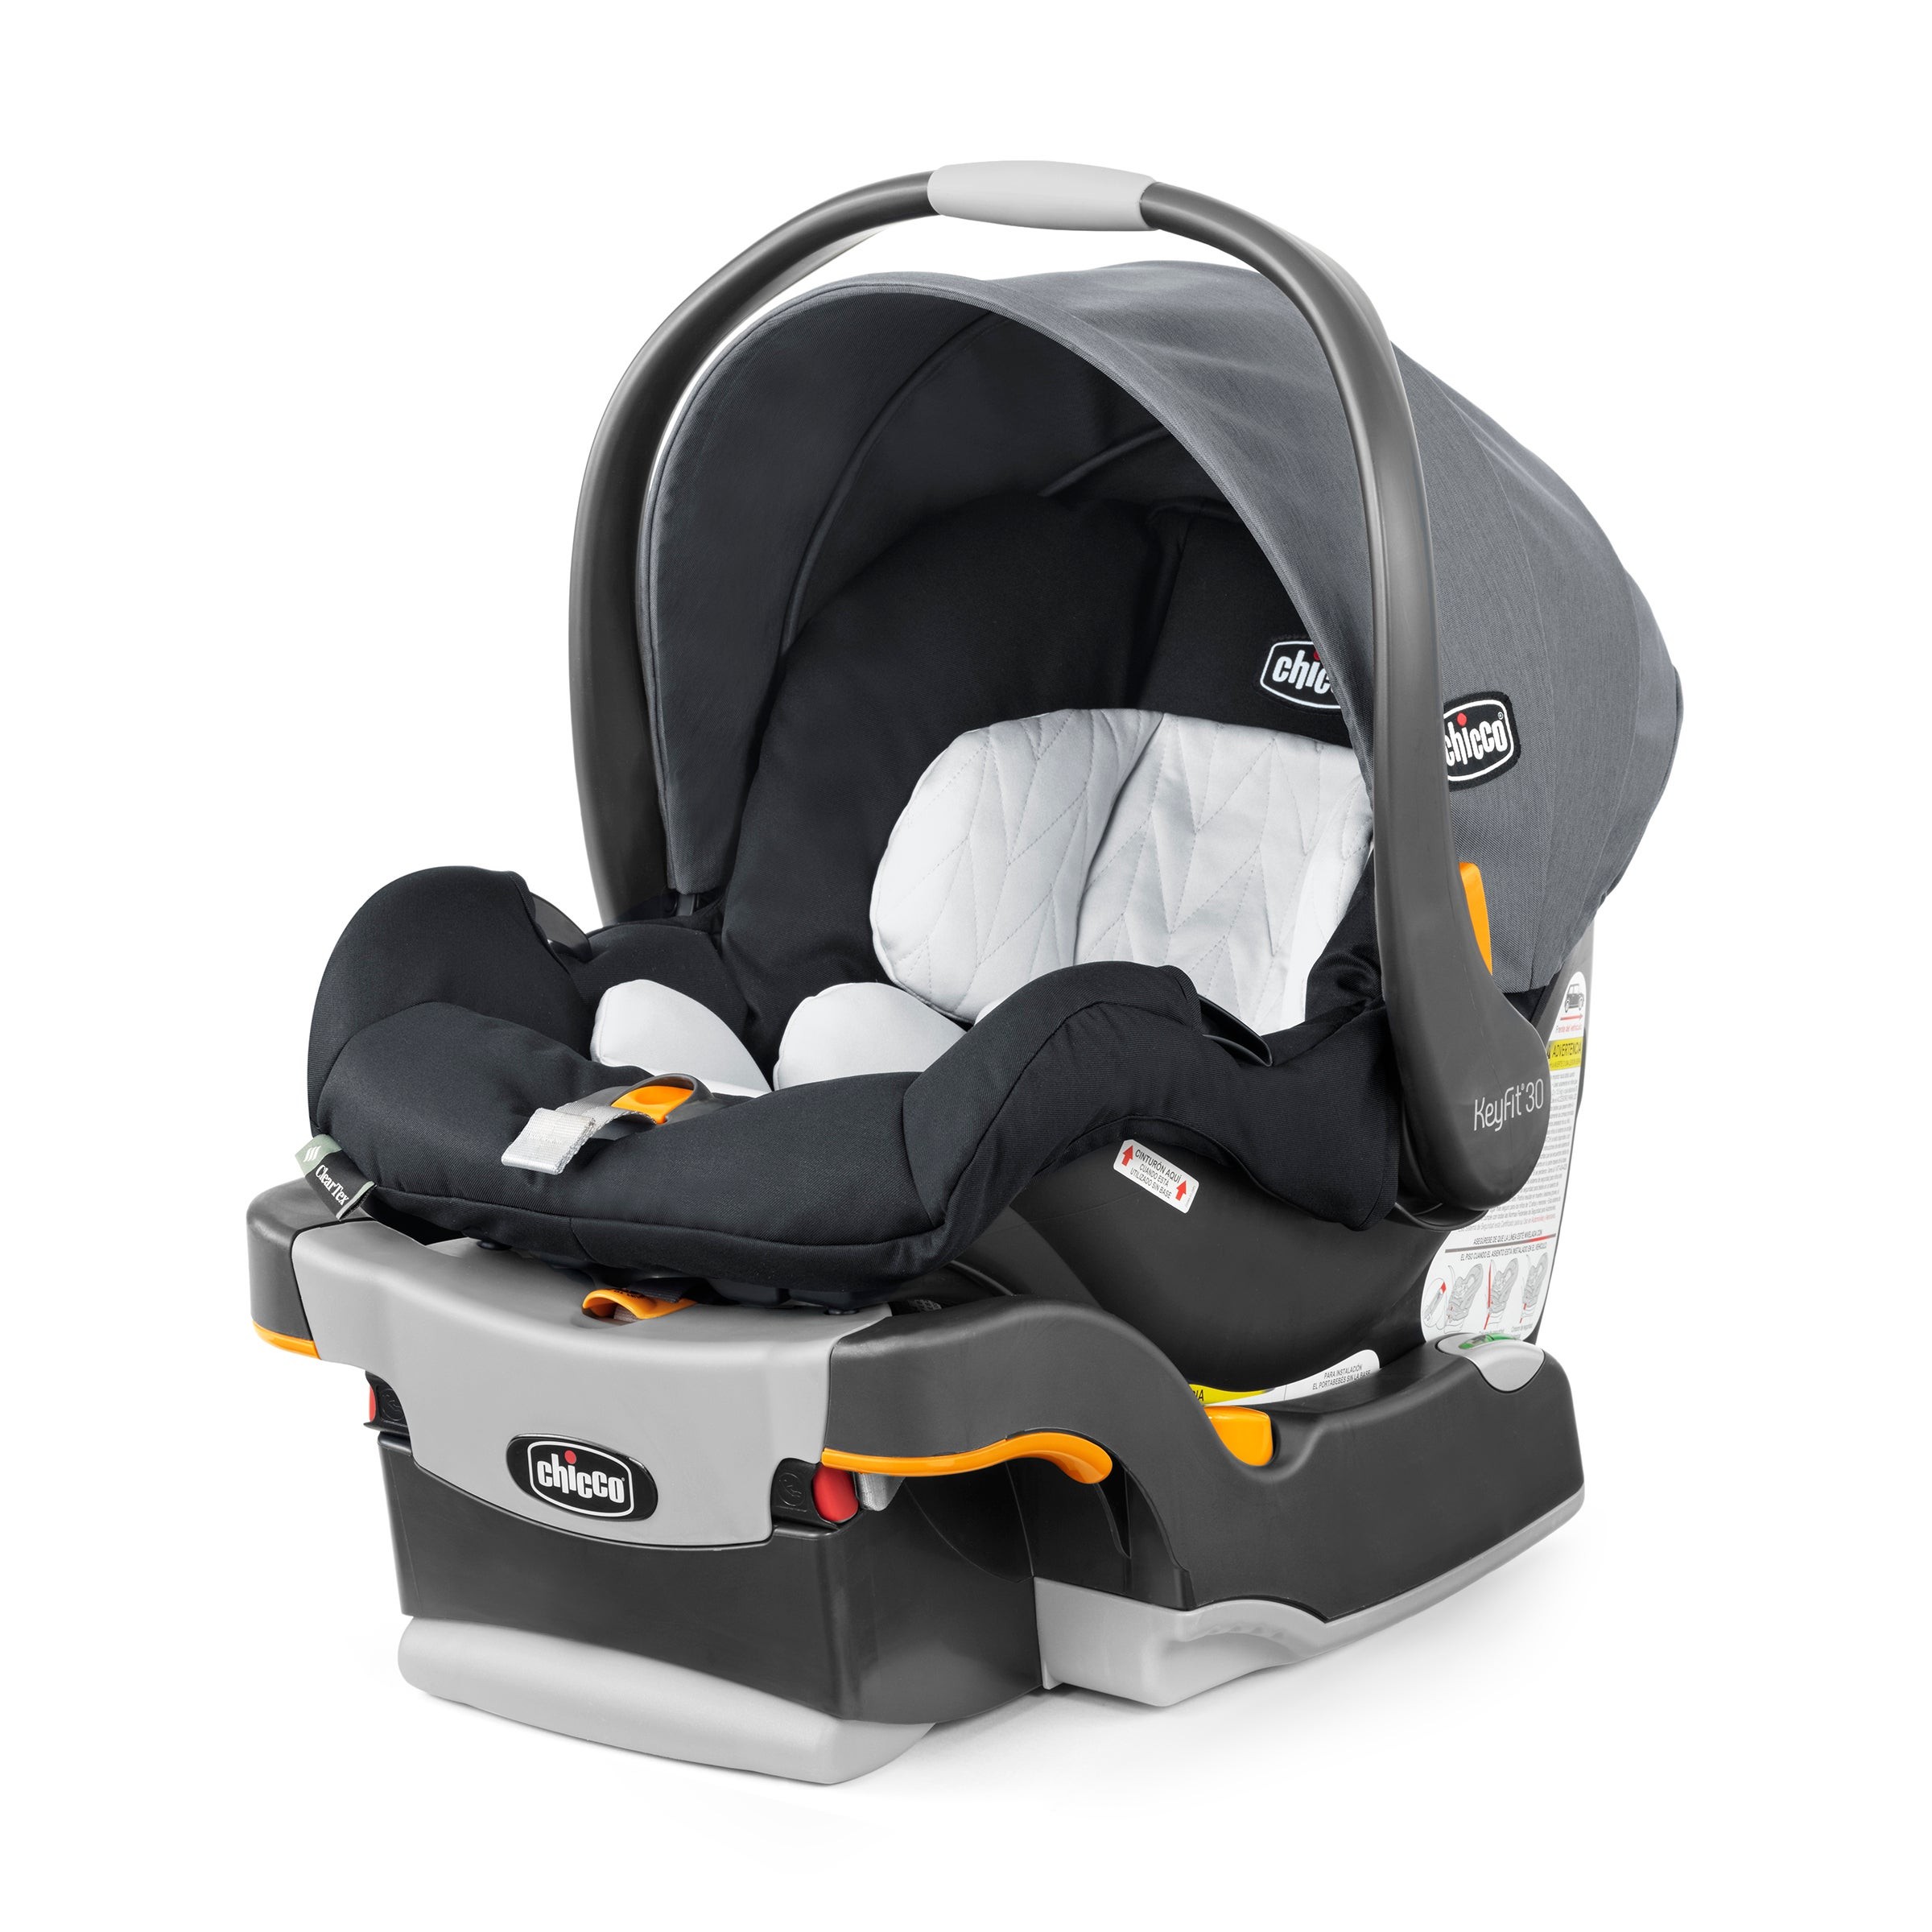 KeyFit 30 ClearTex Infant Car Seat Pewter